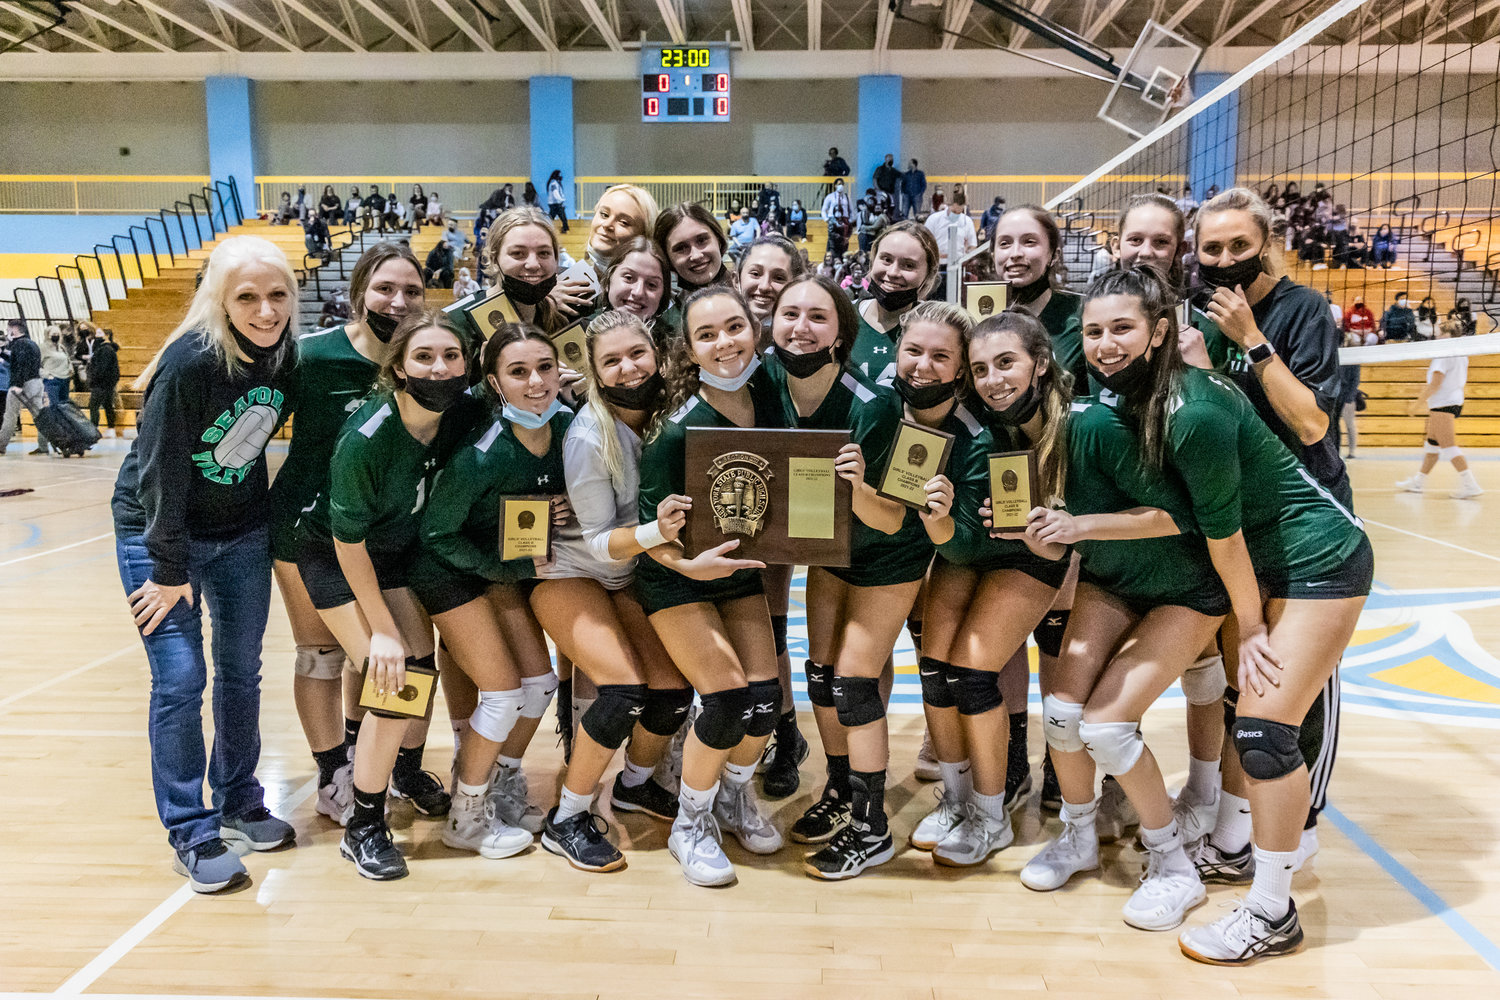 Seaford rallied from two sets down to edge West Hempstead in the Nassau County Class B girls' volleyball championship match Nov. 10 at LIU.